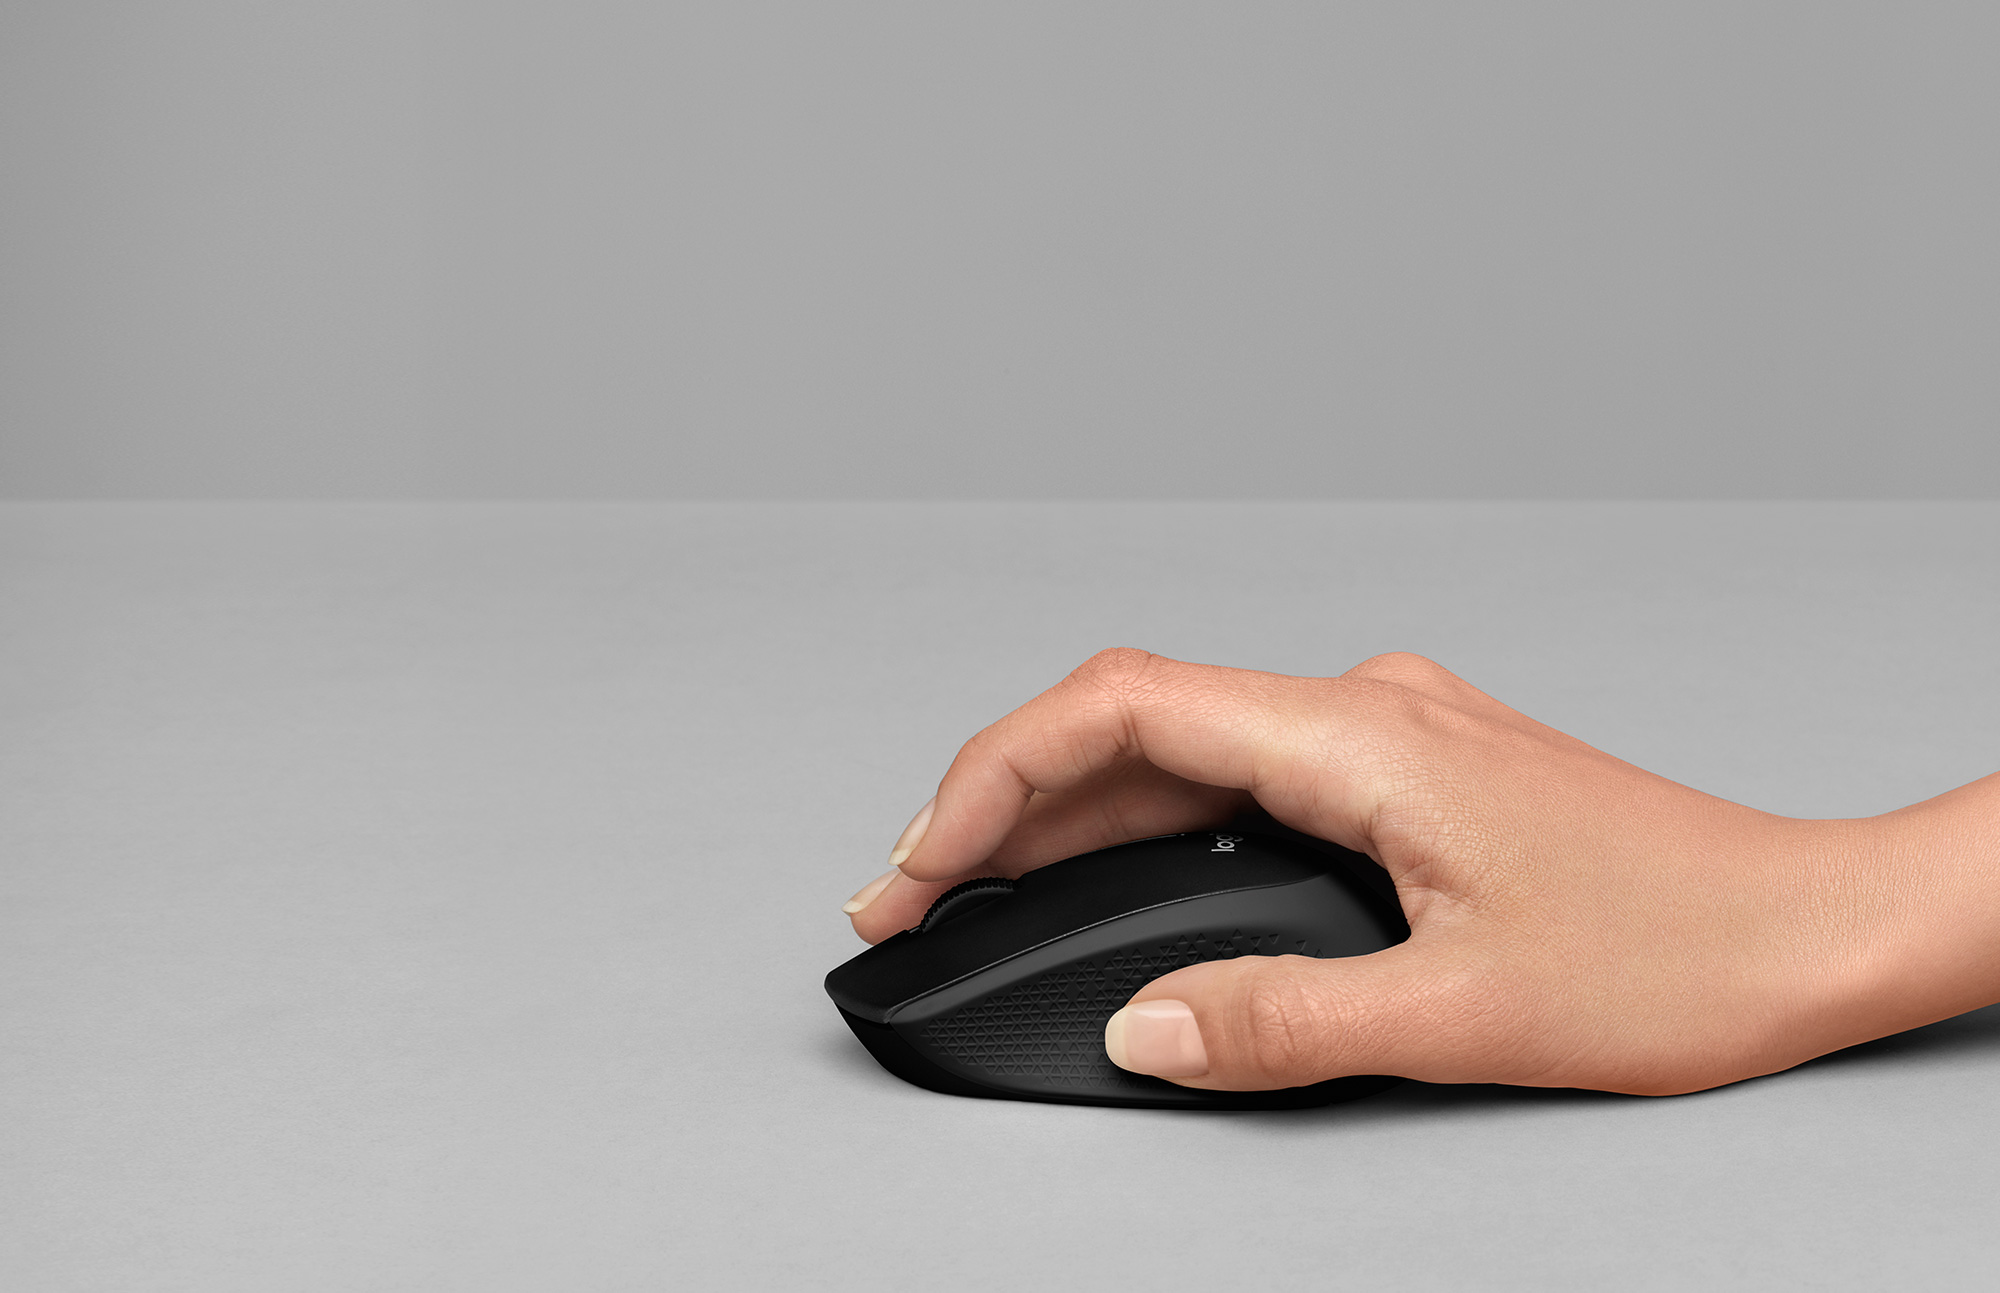 Hand holding logitech m331 mouse